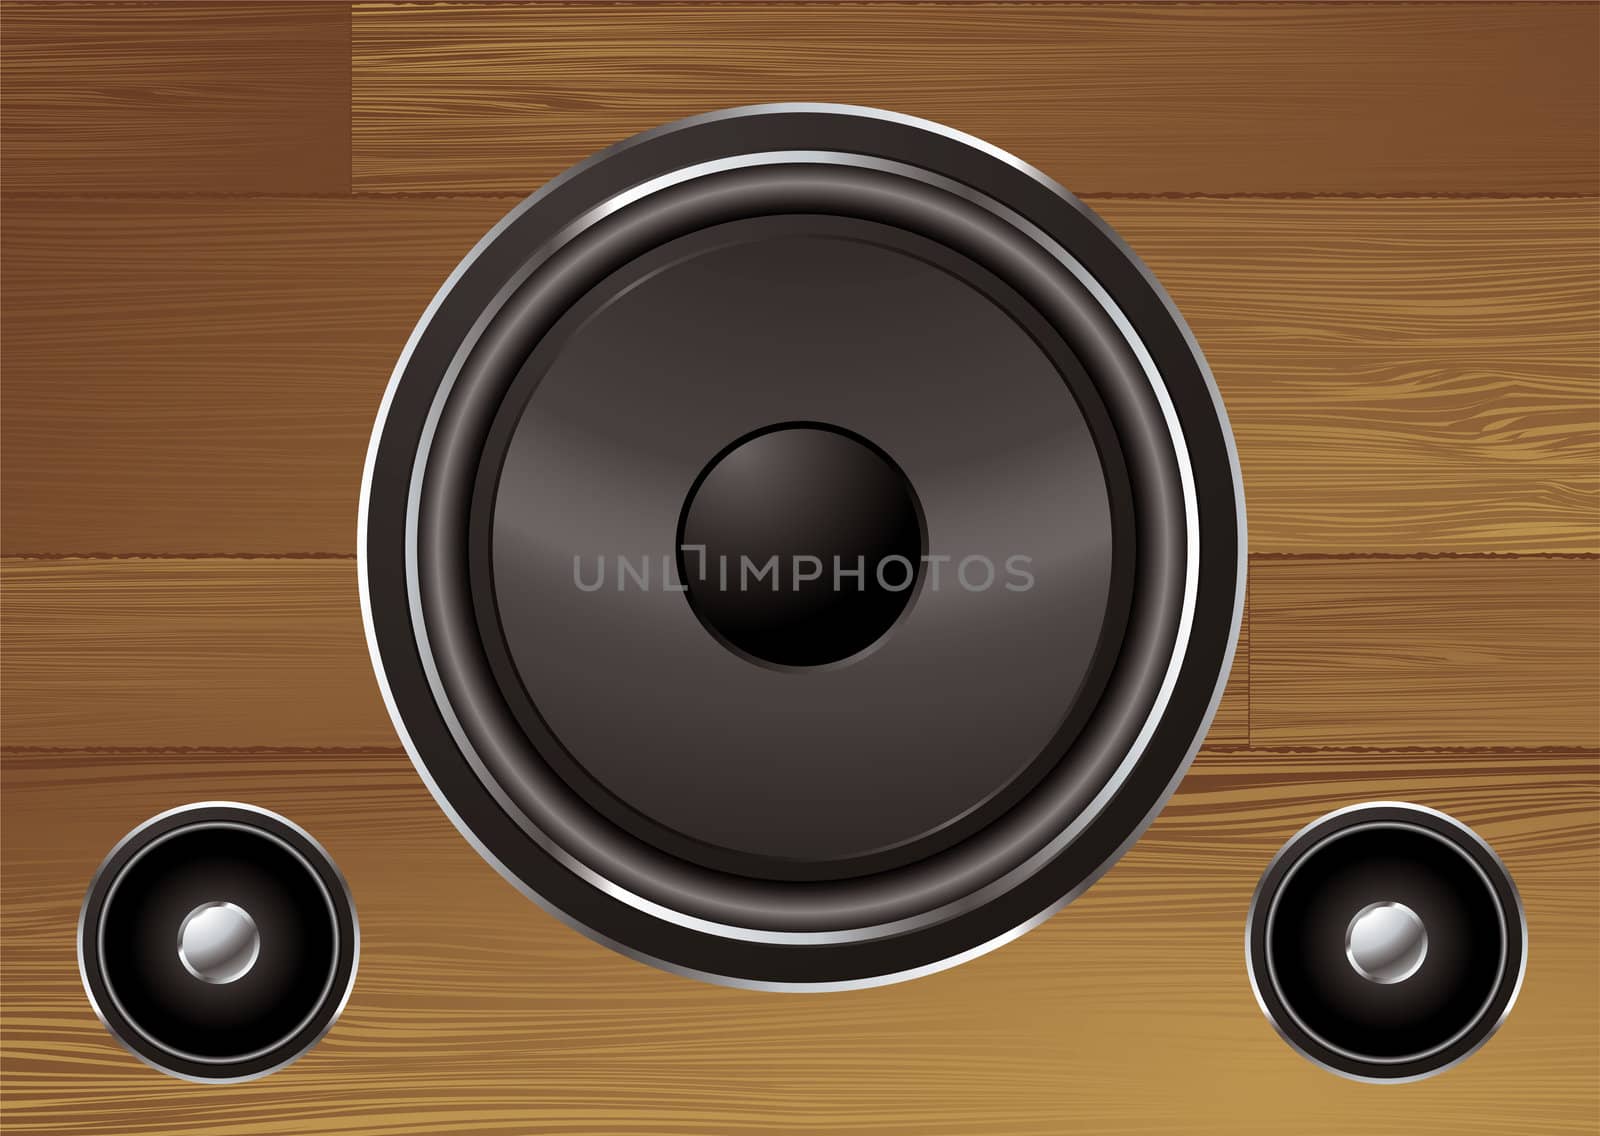 speaker collection on a wood grain illustrated background